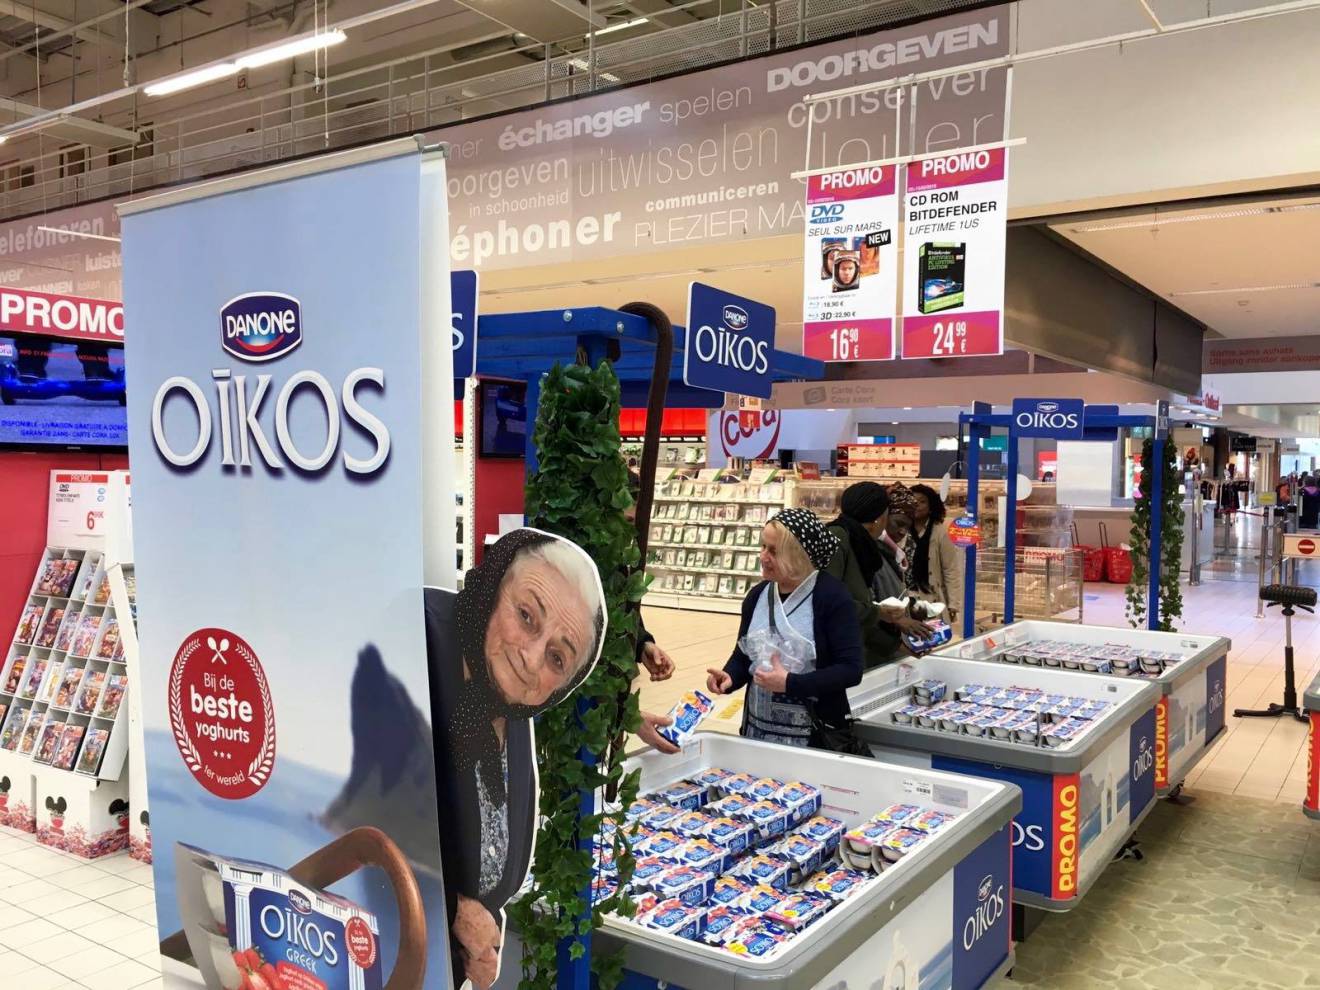 Large format print displays full color printed frontlit Danone rollup for Oikos yoghurt in combination with a full color printed Greek grandmother in forex X-Treme Creations